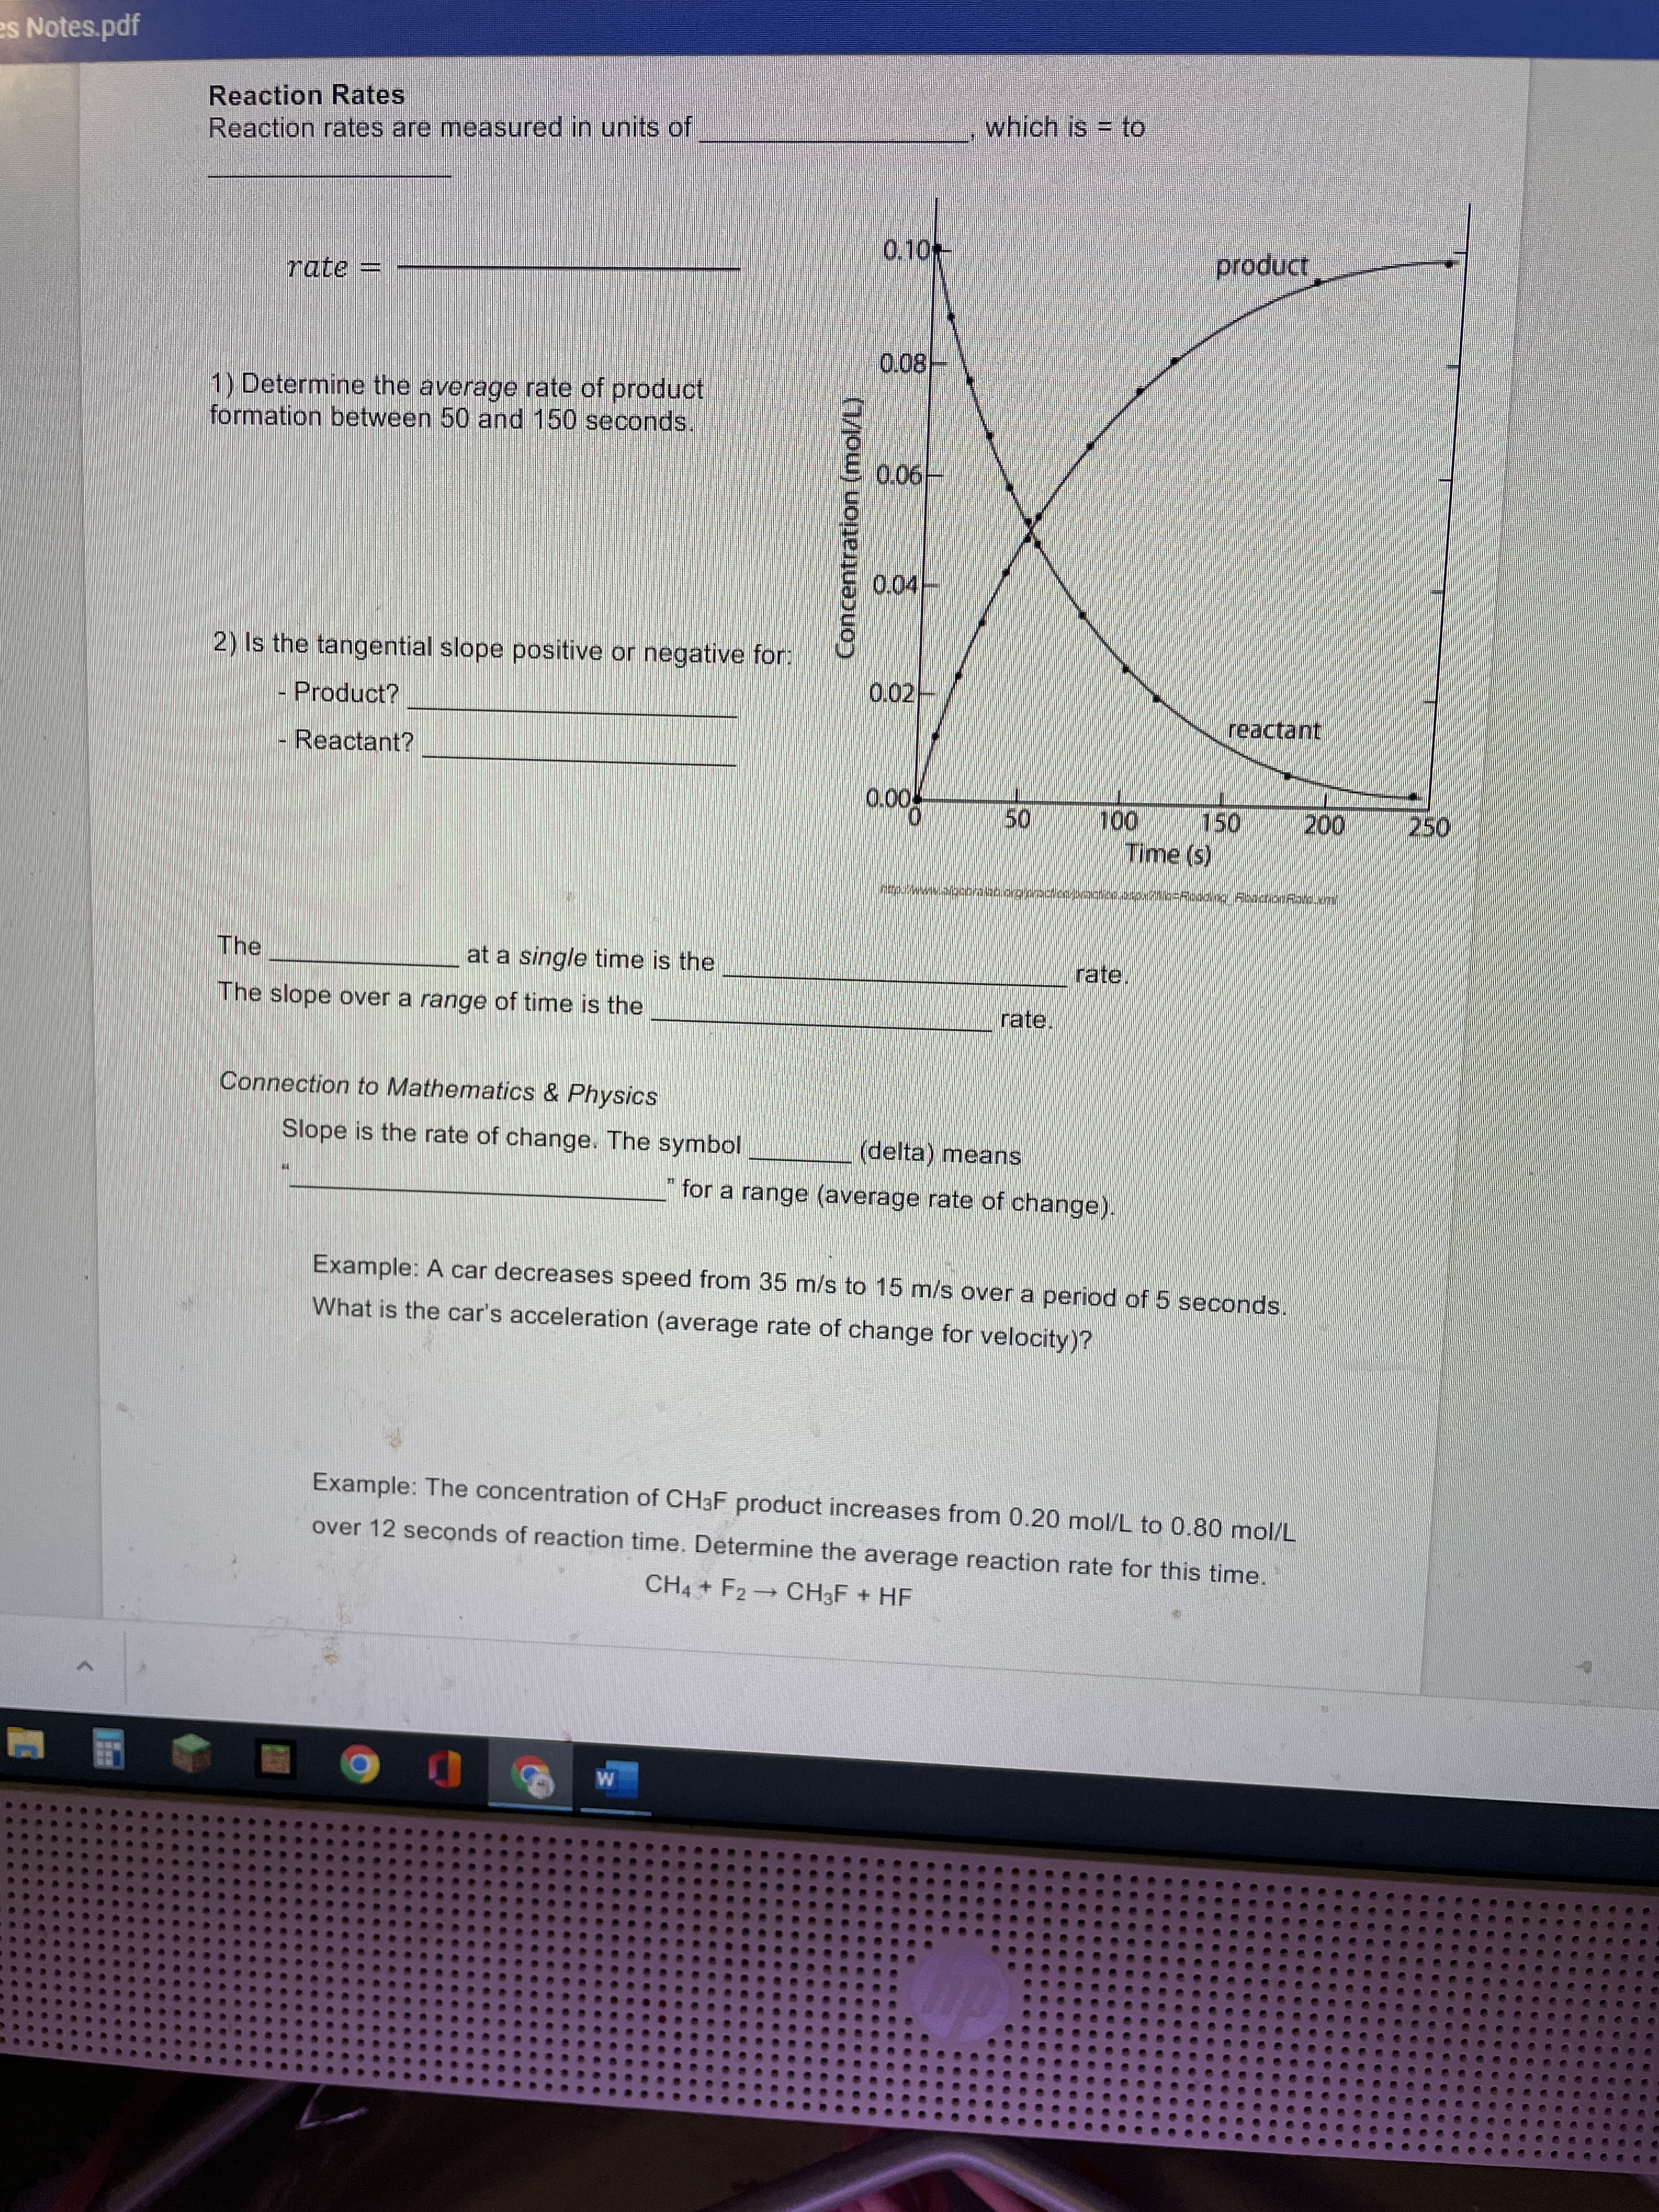 50
Concentration (mol/L)
es Notes.pdf
Reaction Rates
Reaction rates are measured in units of
which is = to
0.10
rate =
Dnpoid
0.08-
1) Determine the average rate of product
formation between 50 and 150 seconds.
H90'0
0.04
2) Is the tangential slope positive or negative for:
0.02-
- Product?
reactant
Reactant?
150
00,
250
Time (s)
The
at a single time is the
rate.
The slope over a range of time is the
rate.
Connection to Mathematics & Physics
Slope is the rate of change. The symbol
(delta) means
"for a range (average rate of change).
Example: A car decreases speed from 35 m/s to 15 m/s over a period of 5 seconds.
What is the car's acceleration (average rate of change for velocity)?
Example: The concentration of CHaF product increases from 0.20 mol/L to 0.80 mol/L
over 12 seconds of reaction time. Determine the average reaction rate for this time.
CH4 + F2 CH3F + HF
